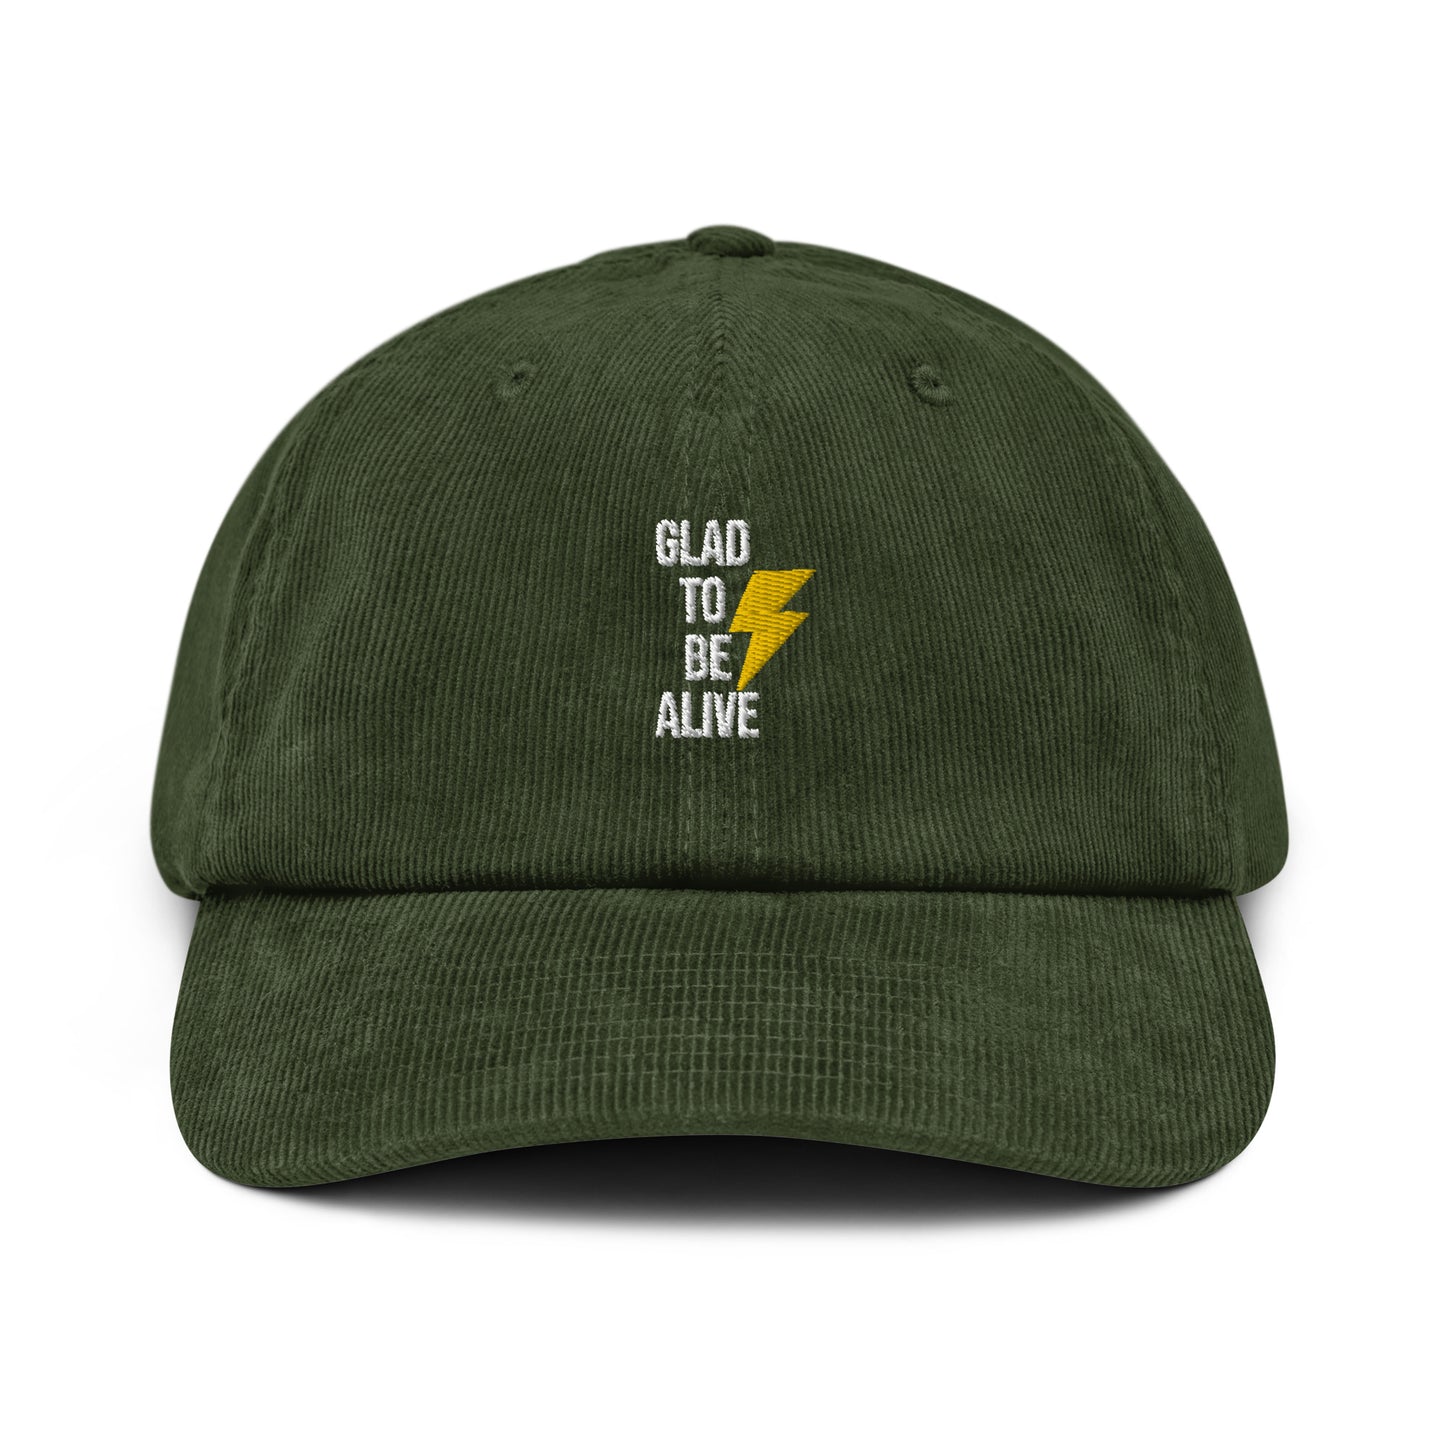 Glad To Be Alive (Corduroy hat)